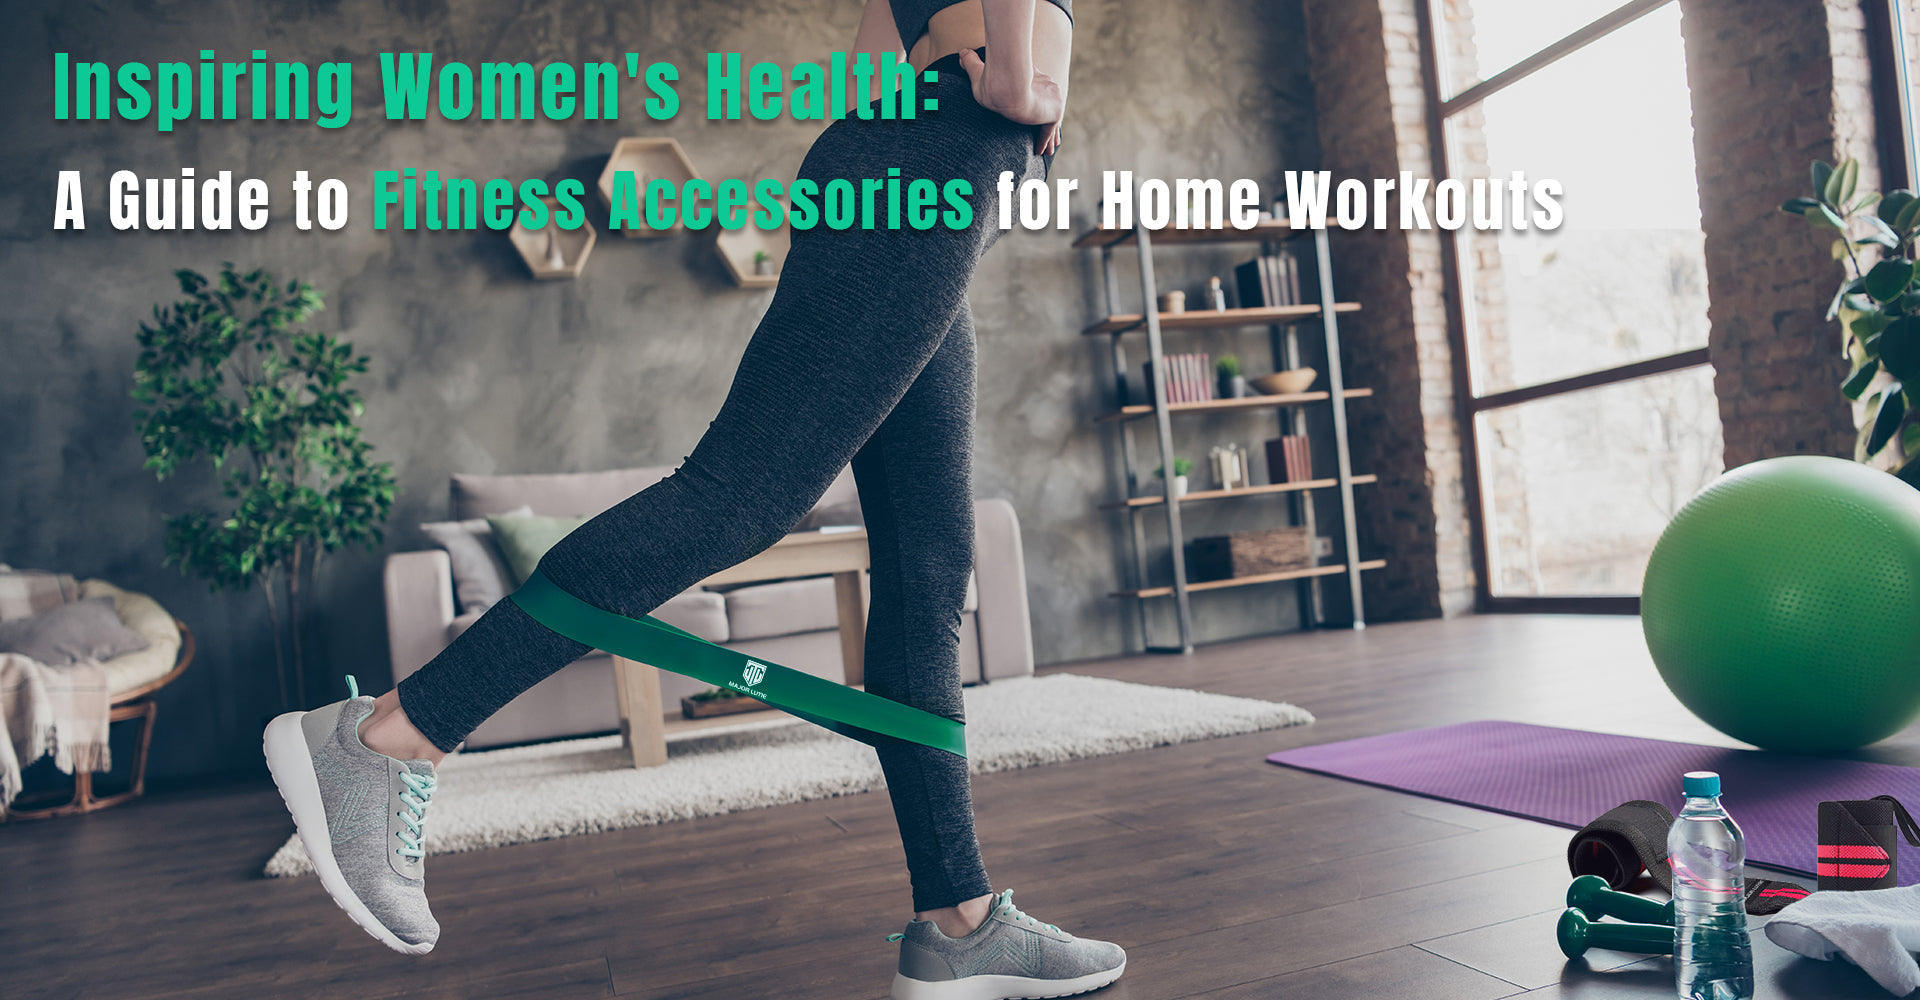 Inspiring Women's Health A Guide to Fitness Accessories for Home Workouts